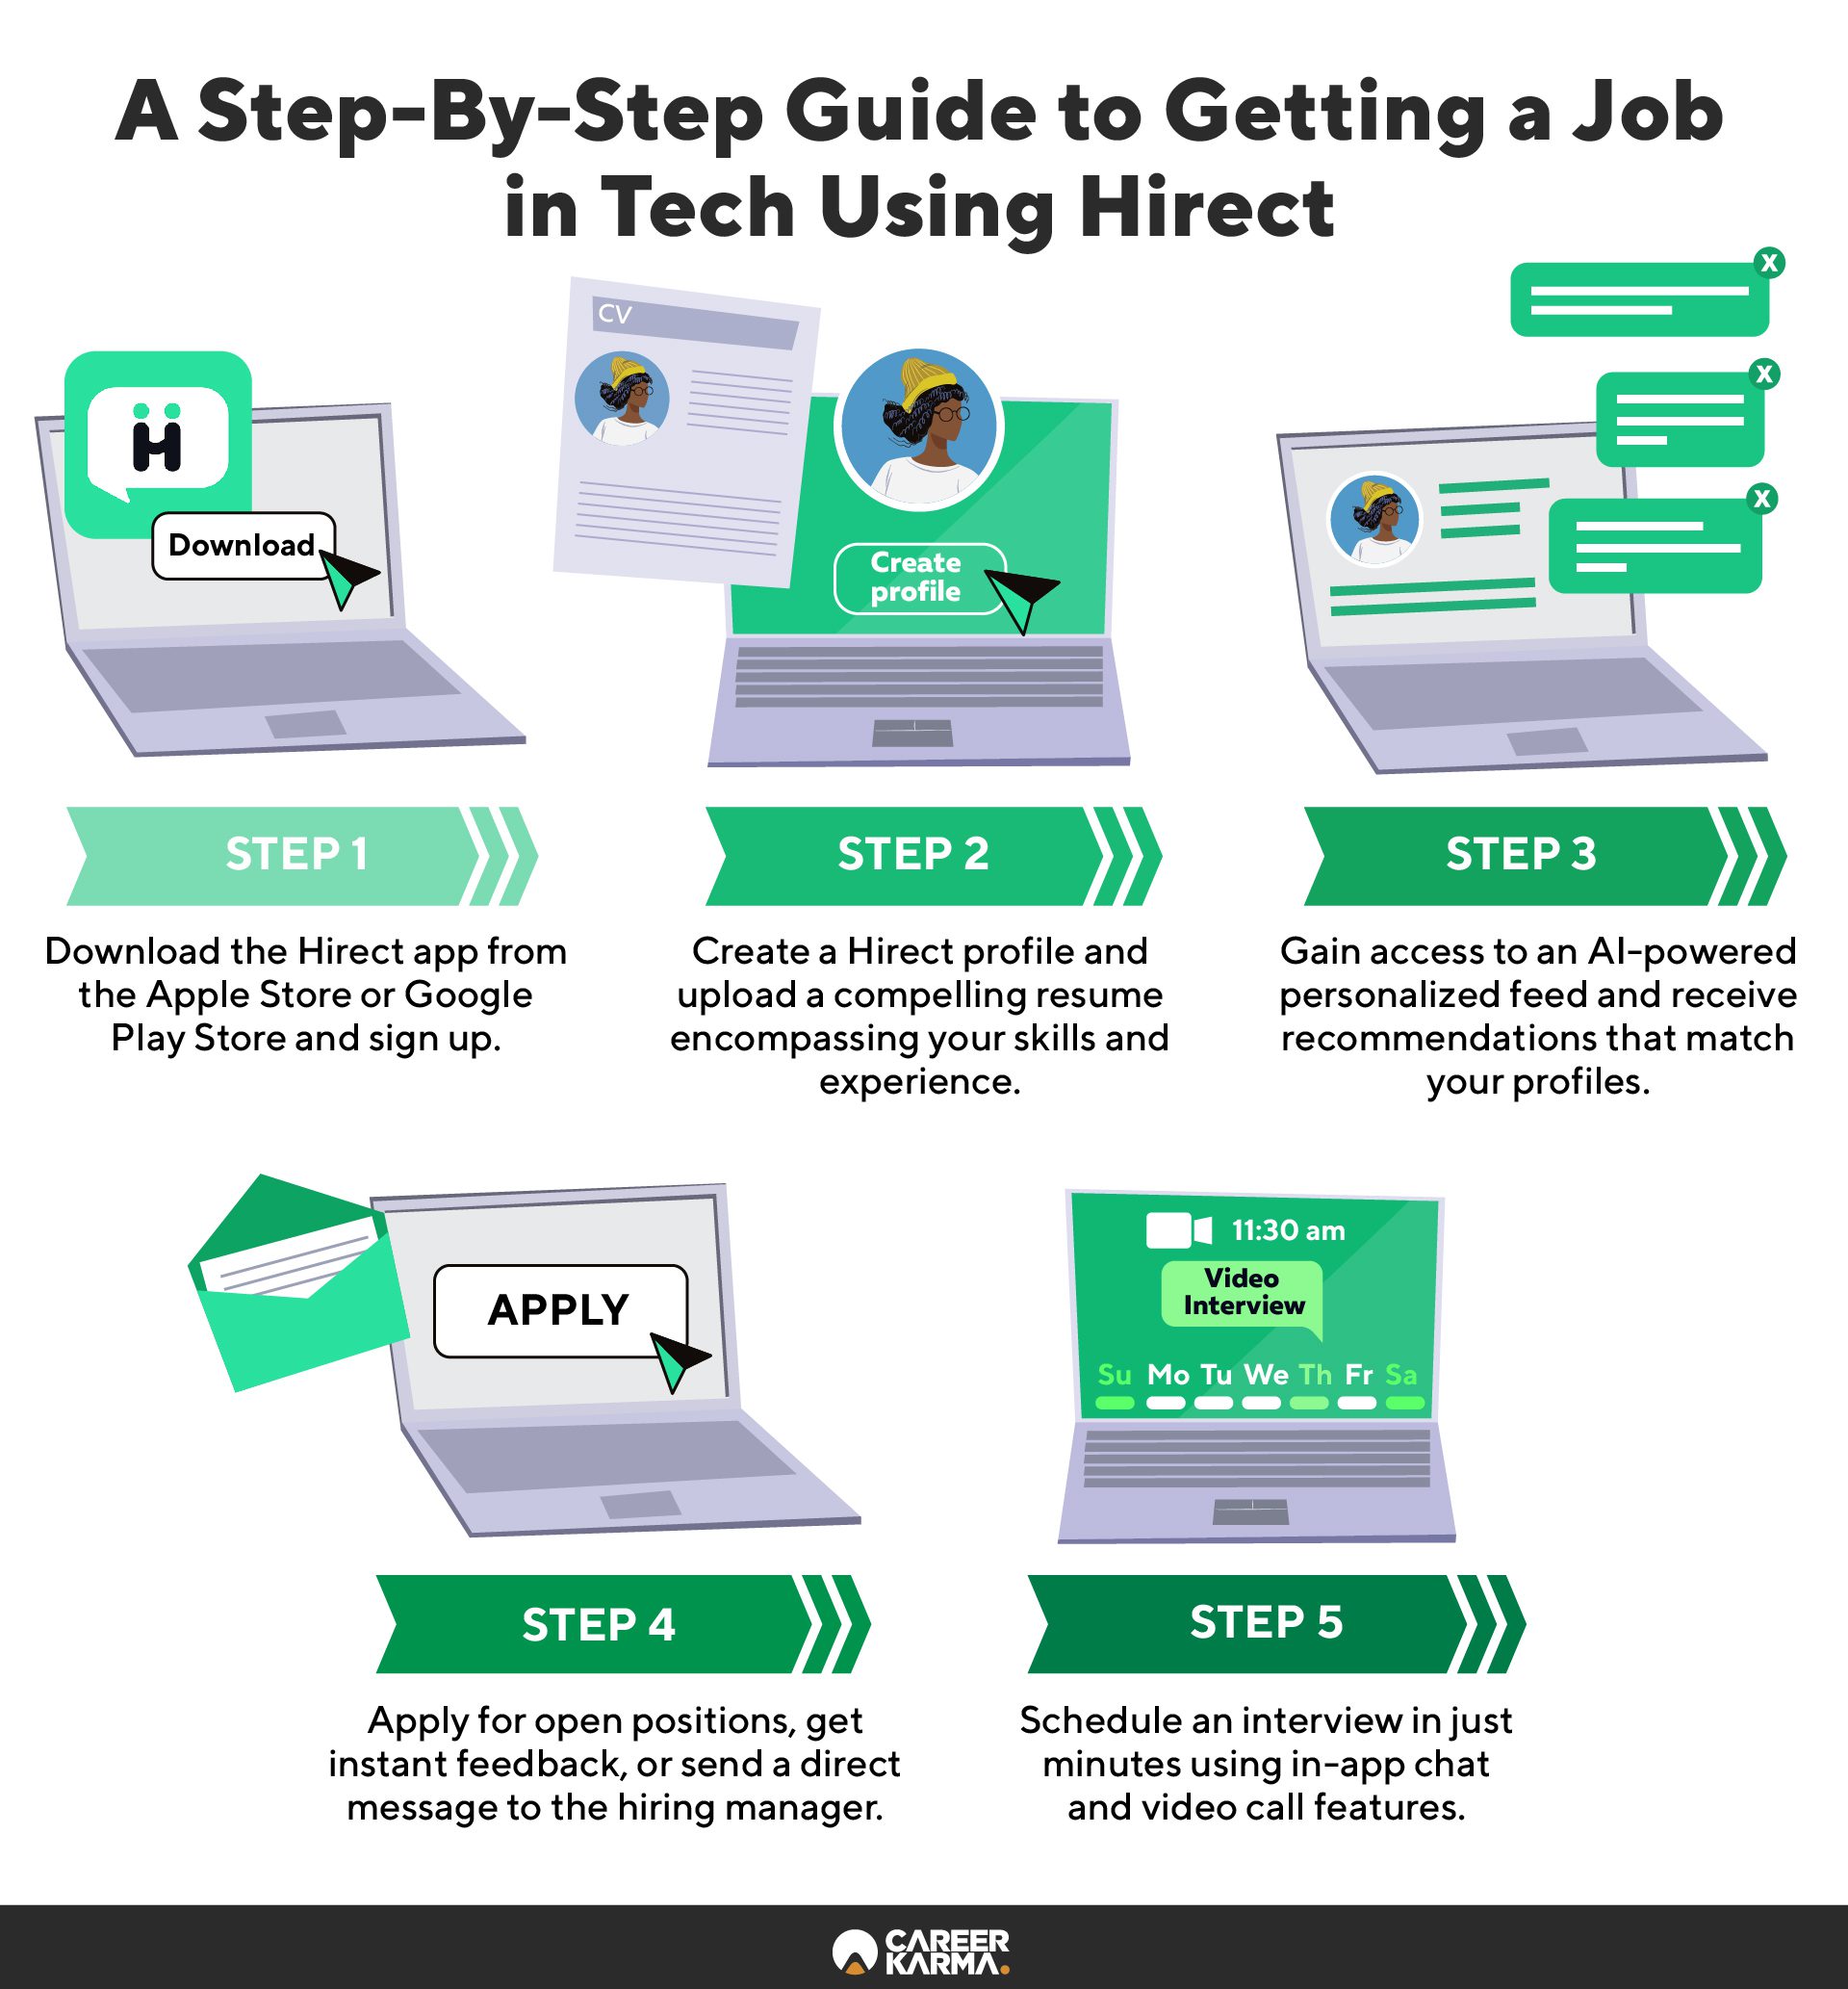 An infographic highlighting the steps to getting a job in tech using Hirect